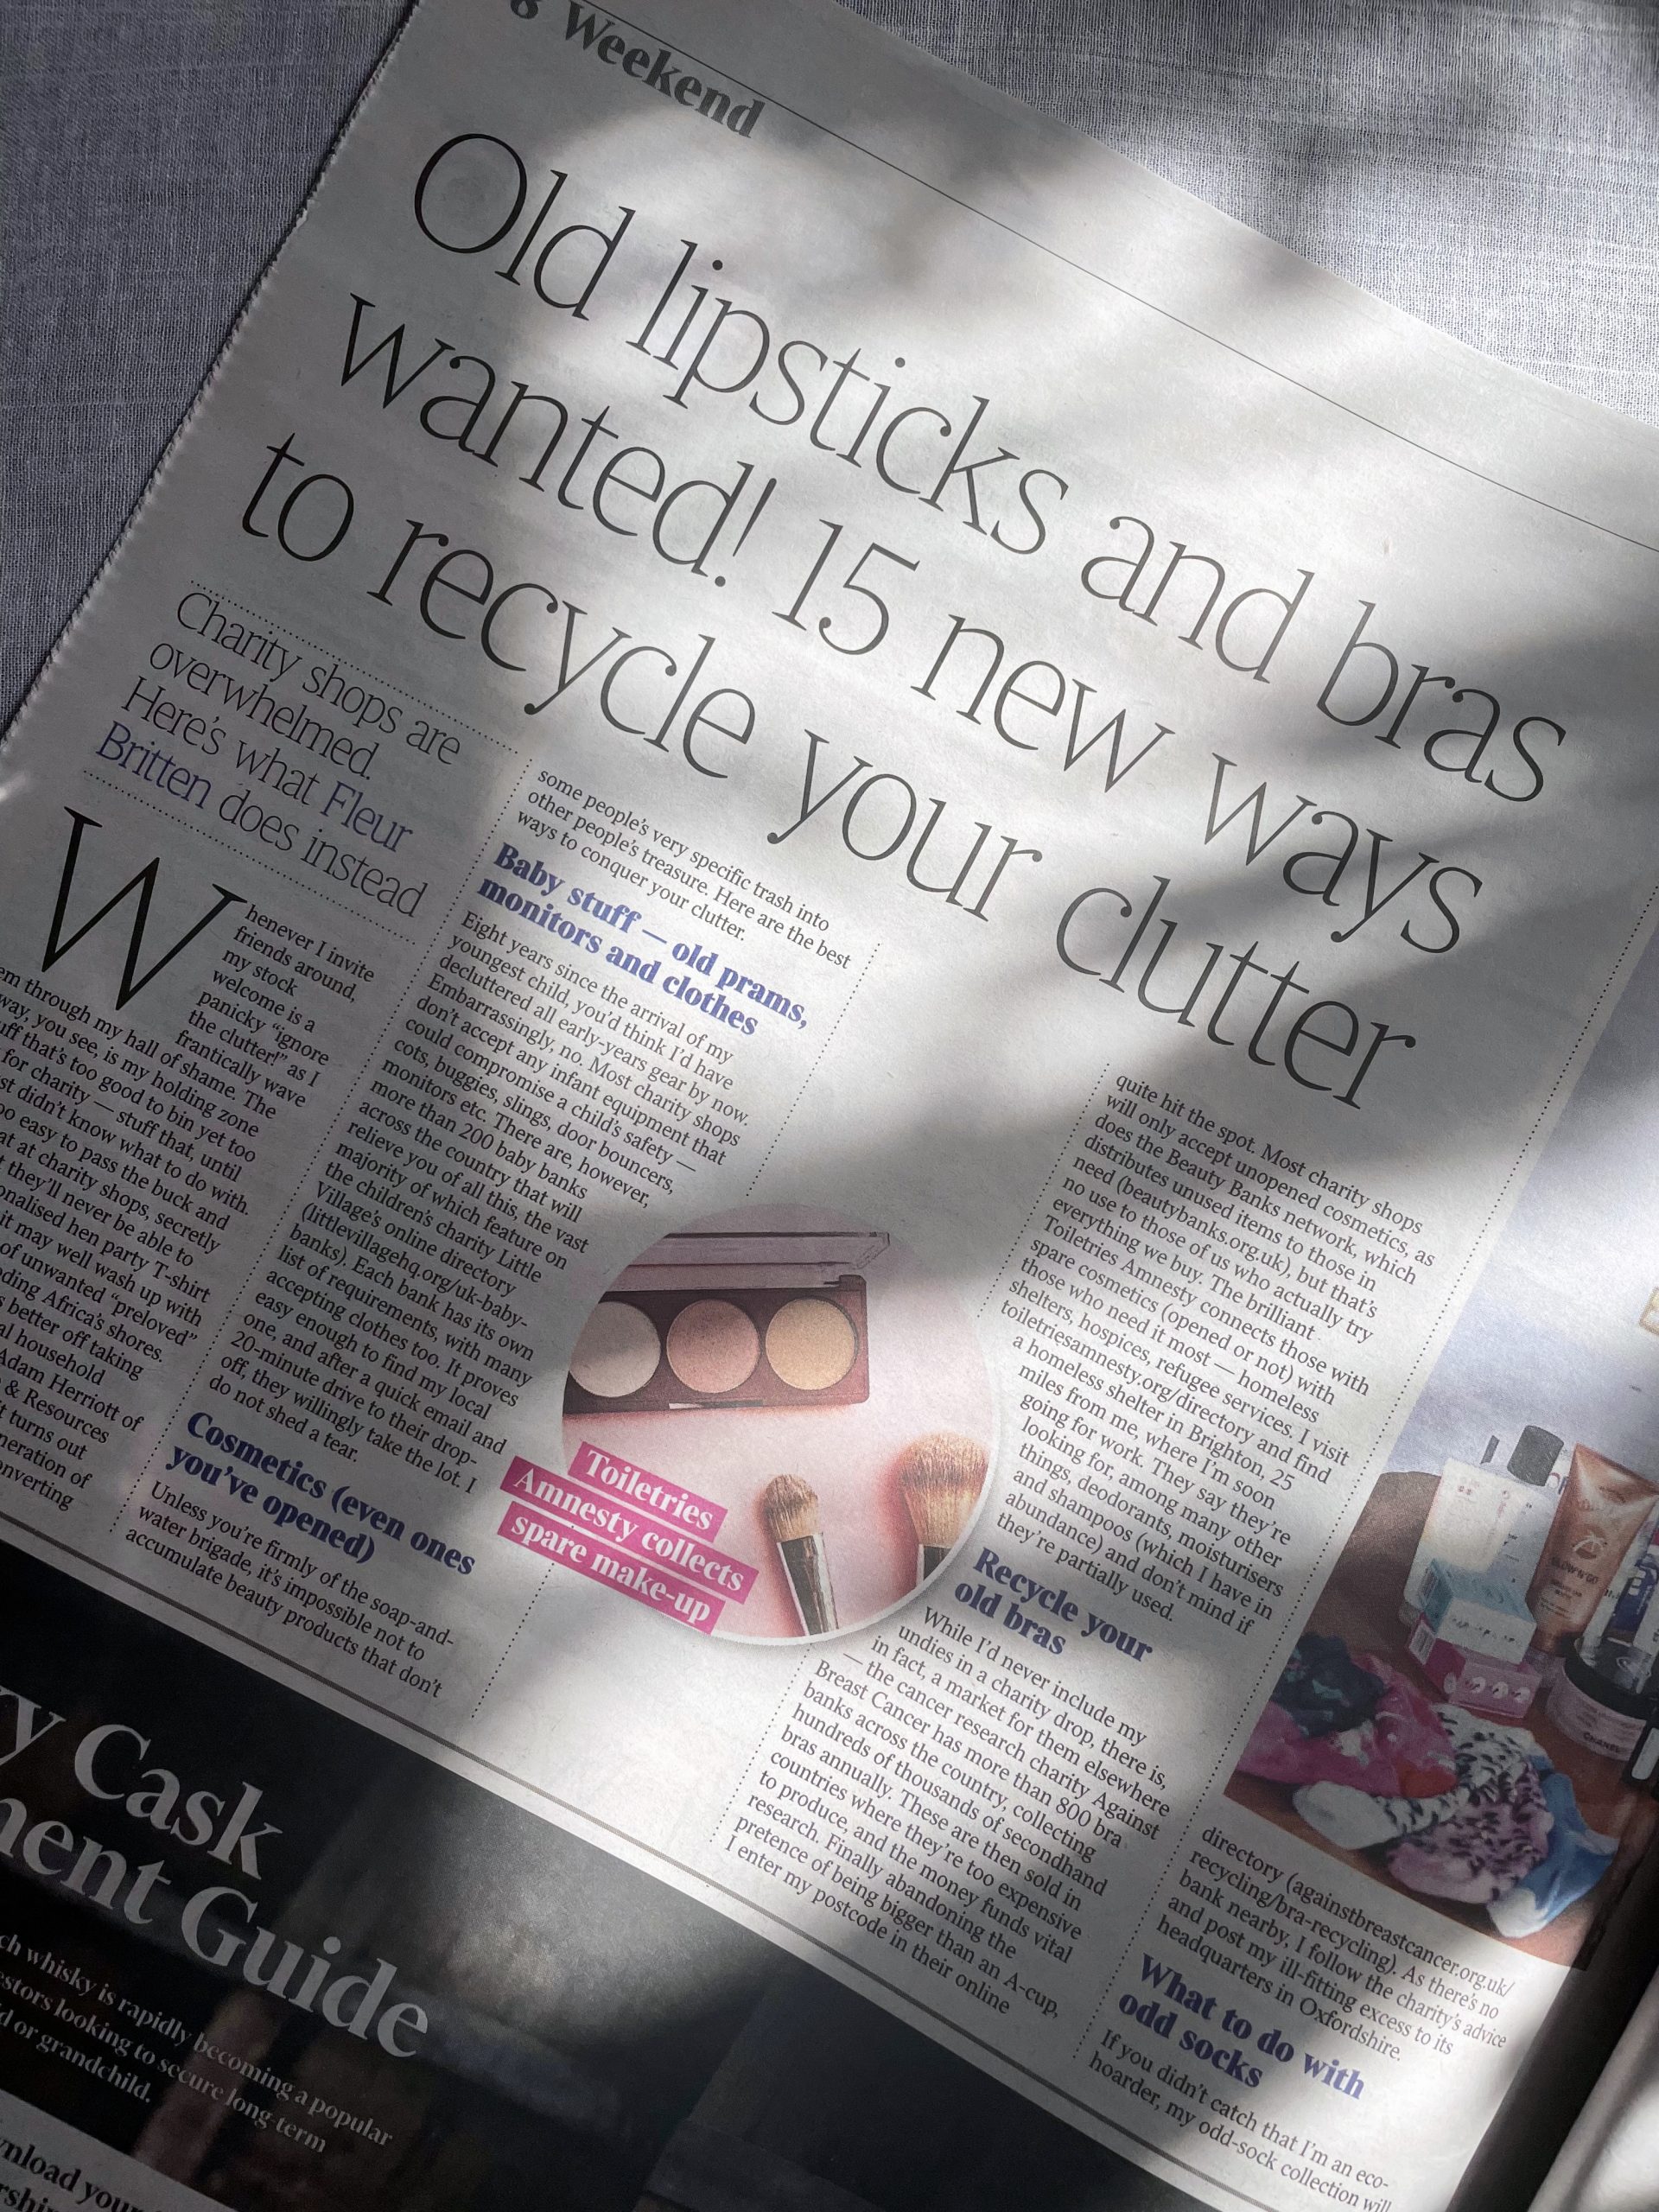 FEATURE: Lipsticks and Bras Wanted! 15 New Ways to Recycle Your Clutter -  The Times - Toiletries Amnesty